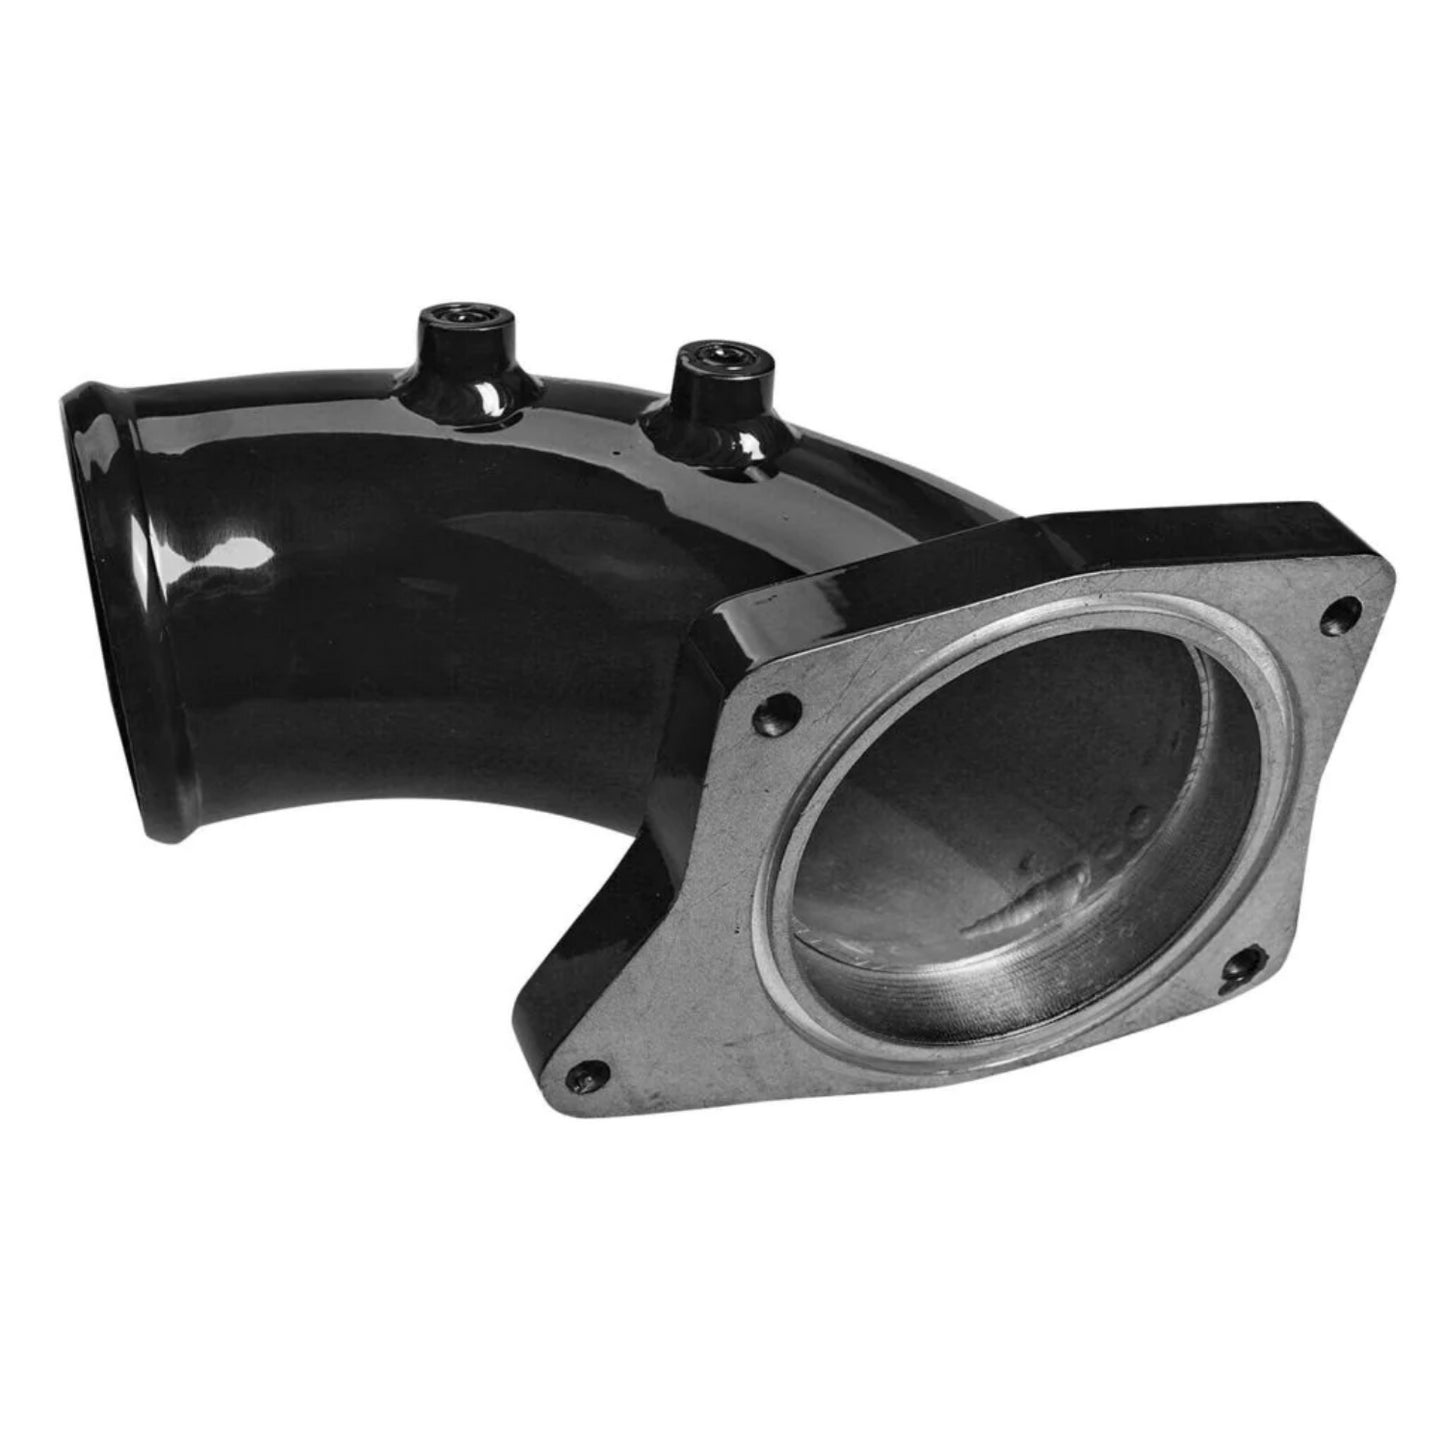 EGR Bypass Delete Kit & Intake Elbow for 2003 - 2007 Ford F250 F350 F450 F550 6.0L Powerstroke Diesel